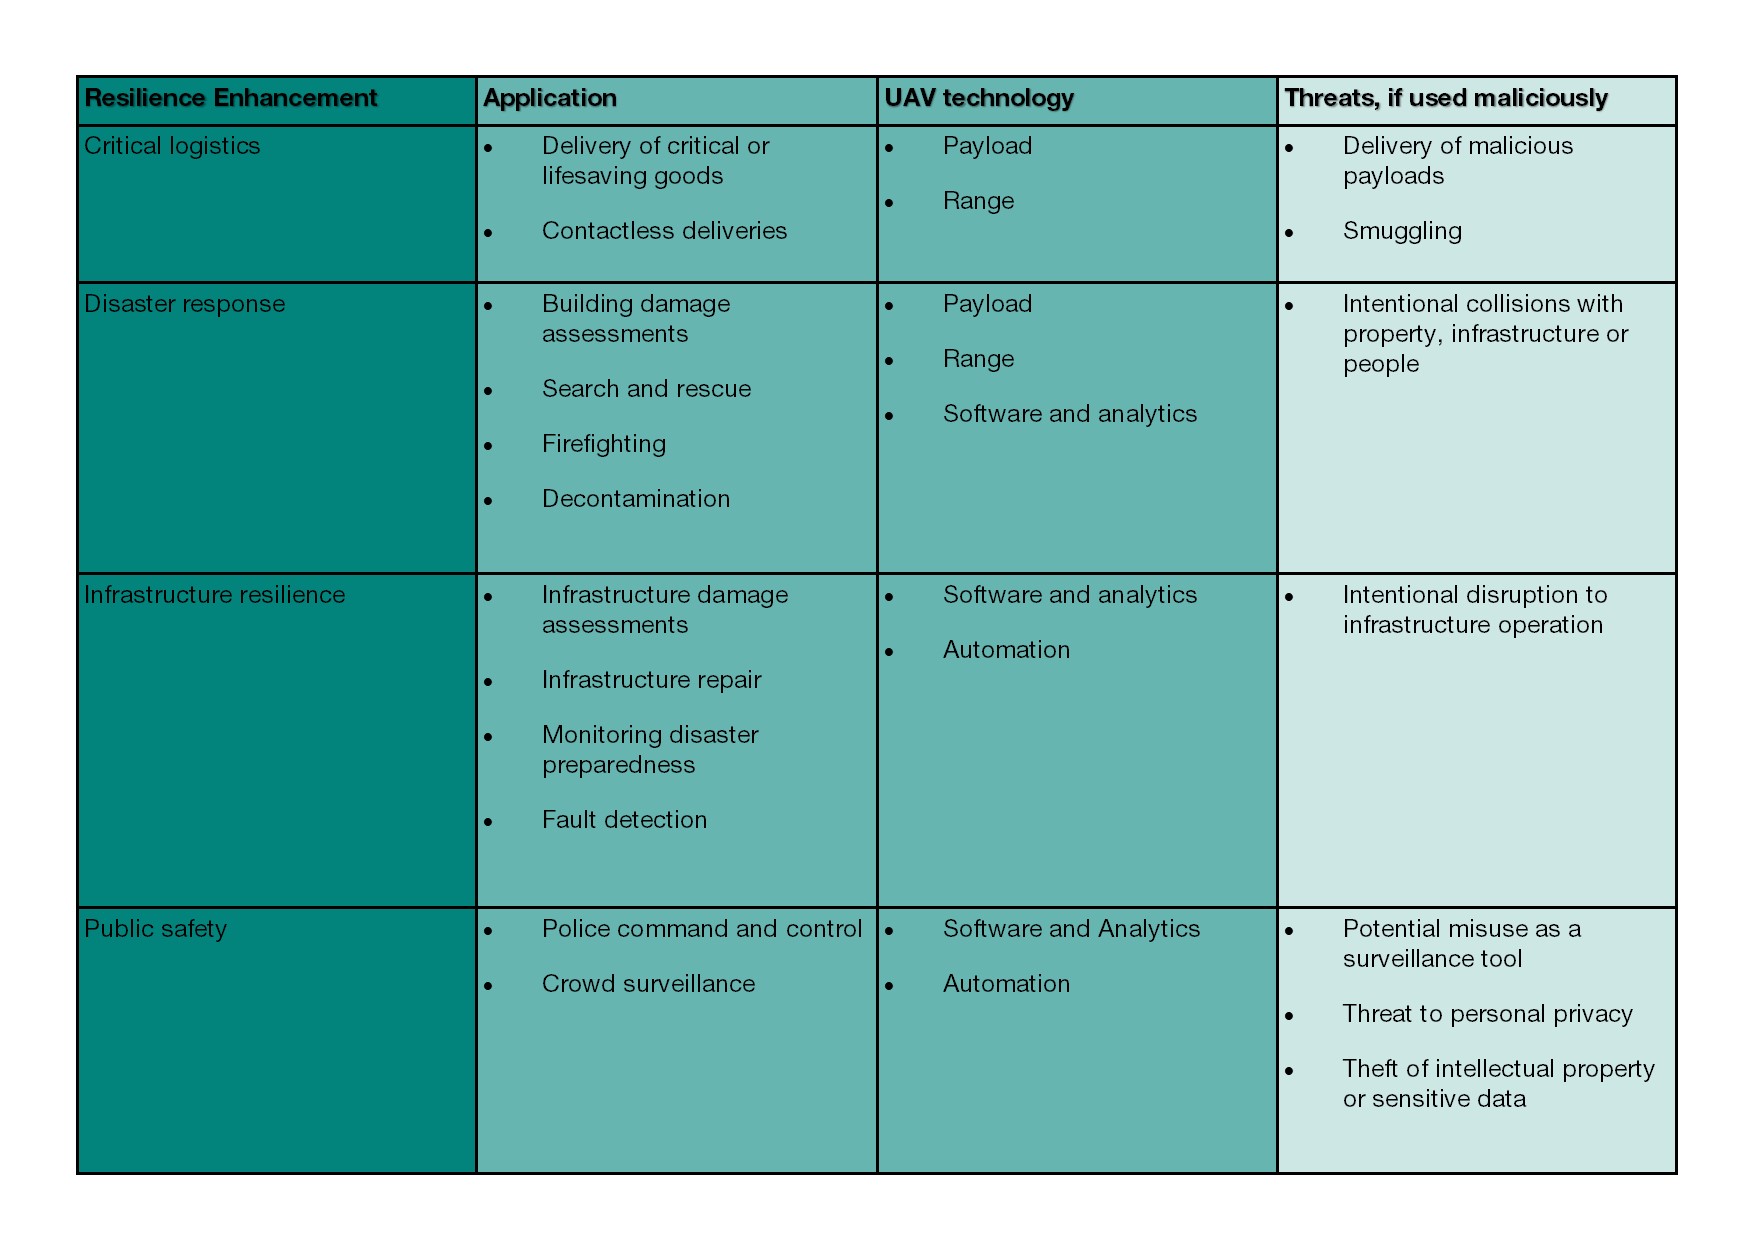 Table illustrating the benefits and risks of drone/uav technology to the built environment